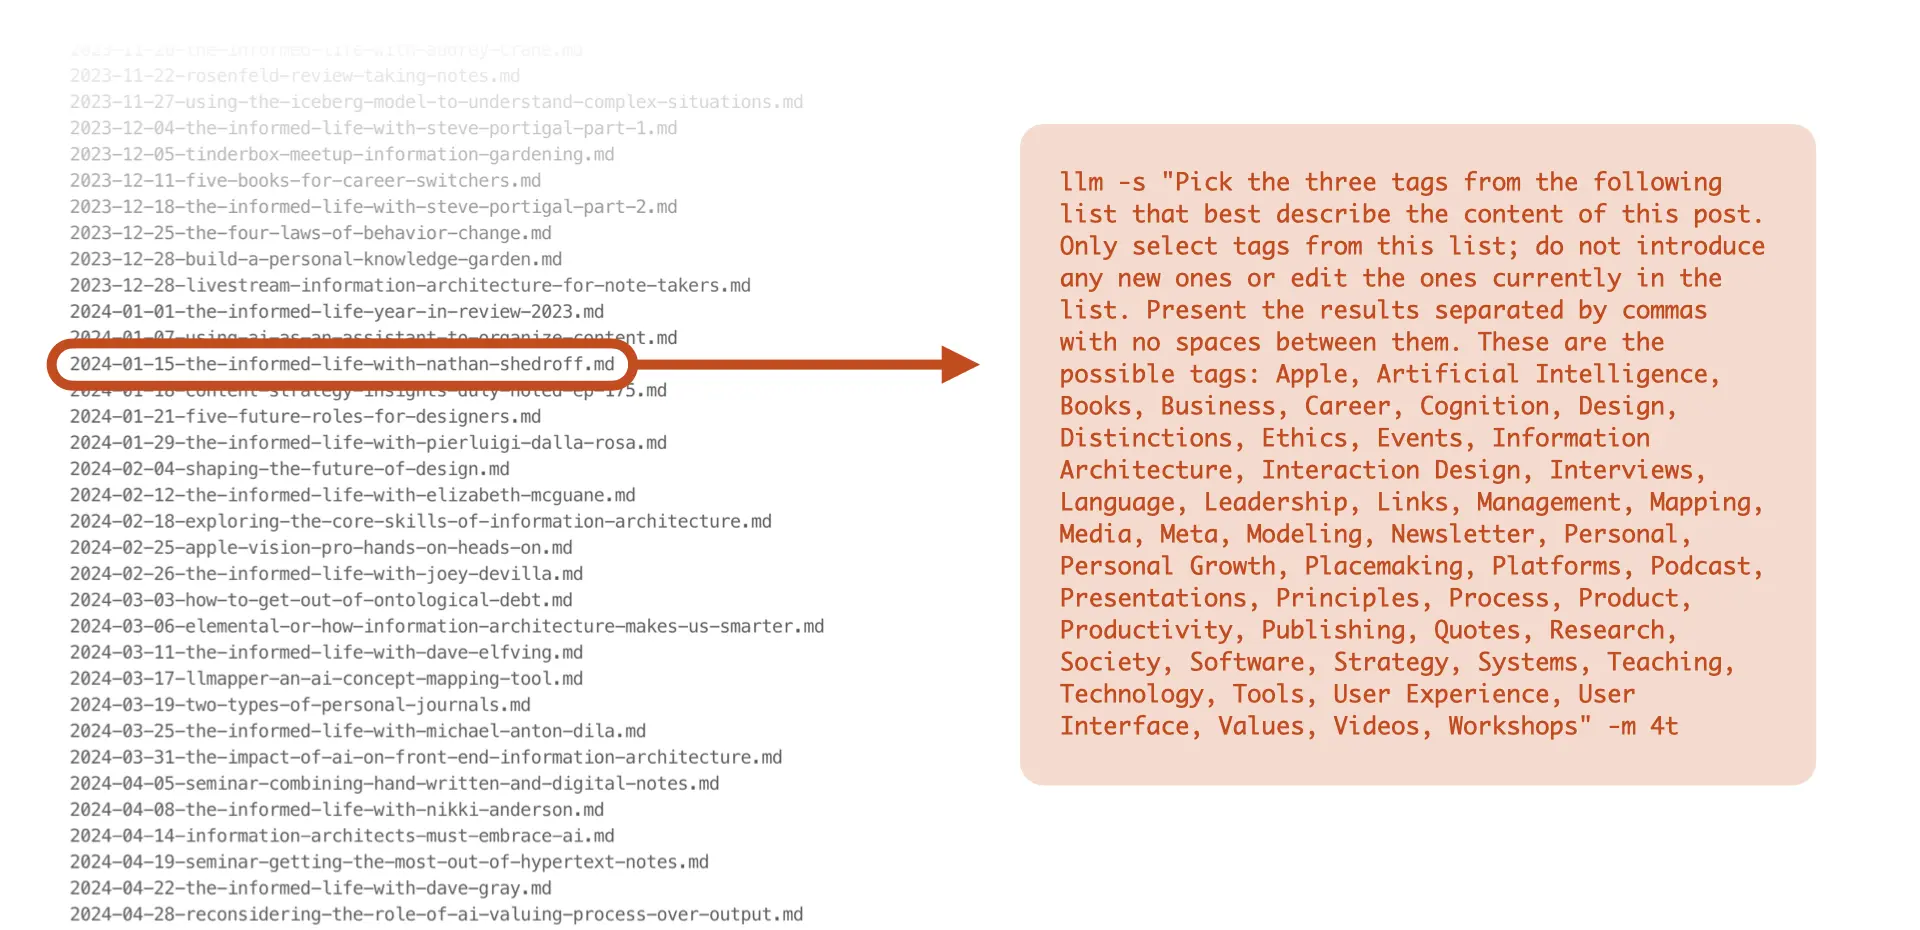 A screenshot showing a list of markdown file names in a directory on the left. The file “2024-01-15-the-informed-life-with-nathan-shedroff.md” is highlighted and pointed to by an arrow. On the right side, there is a block of text with instructions for selecting tags: “Pick three tags from the following list that best describe the content of this post. Only select tags from this list; do not introduce any new ones or edit the ones currently in the list. Present the results separated by commas with no spaces between them.” A list of possible tags follows, including topics like Apple, Artificial Intelligence, Books, Business, Career, Cognition, Design, and many more. The instructions end with “-m 4t” indicating a command or parameter. 